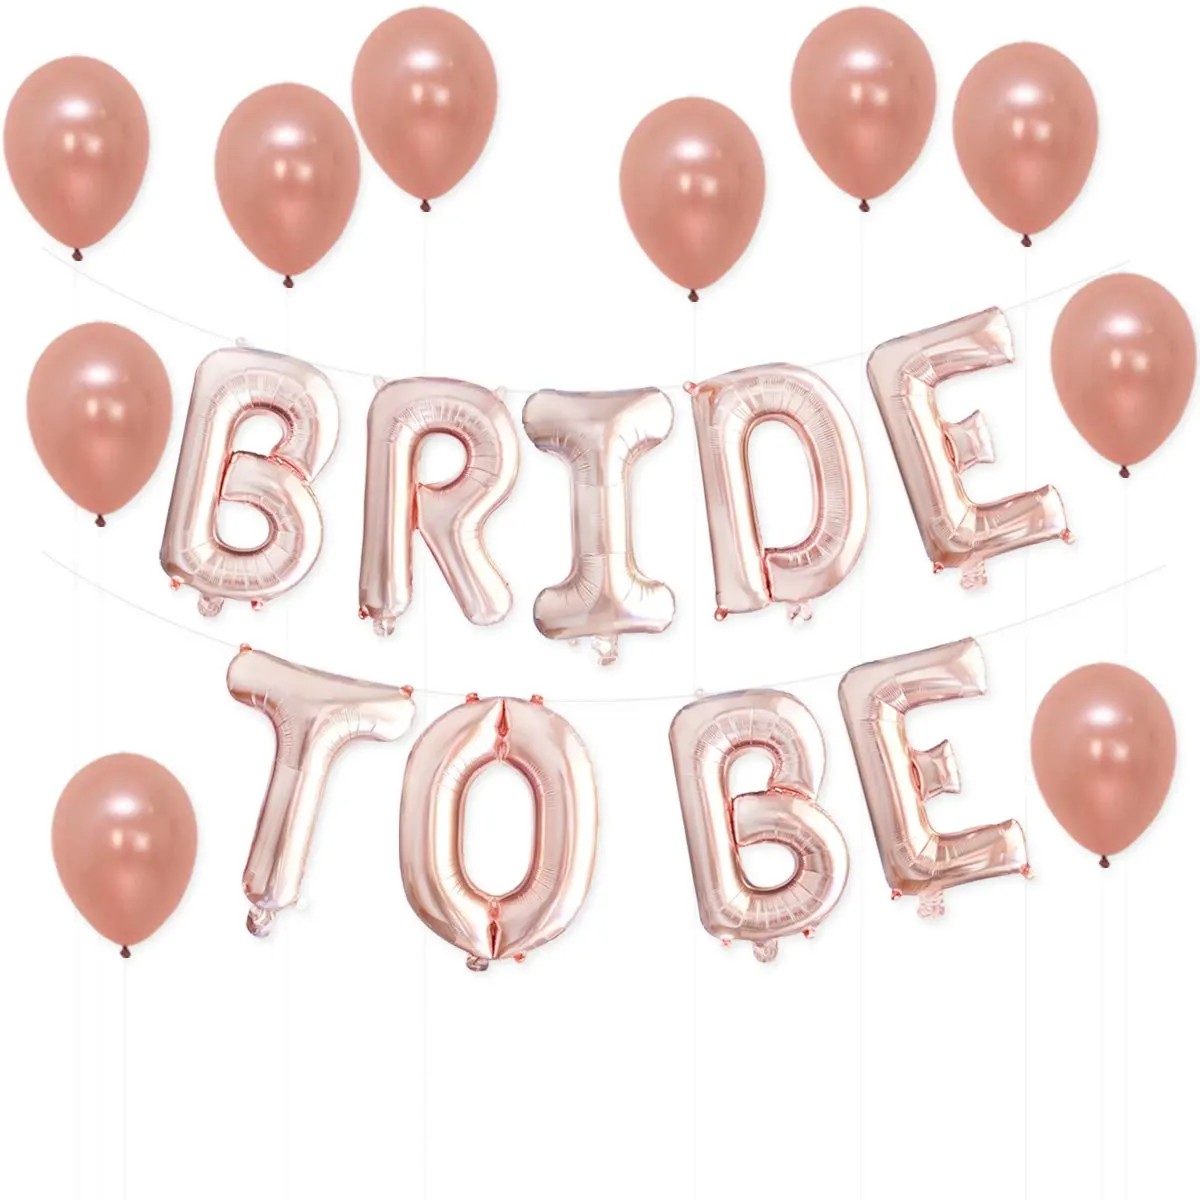 Bride-to-be Balloons